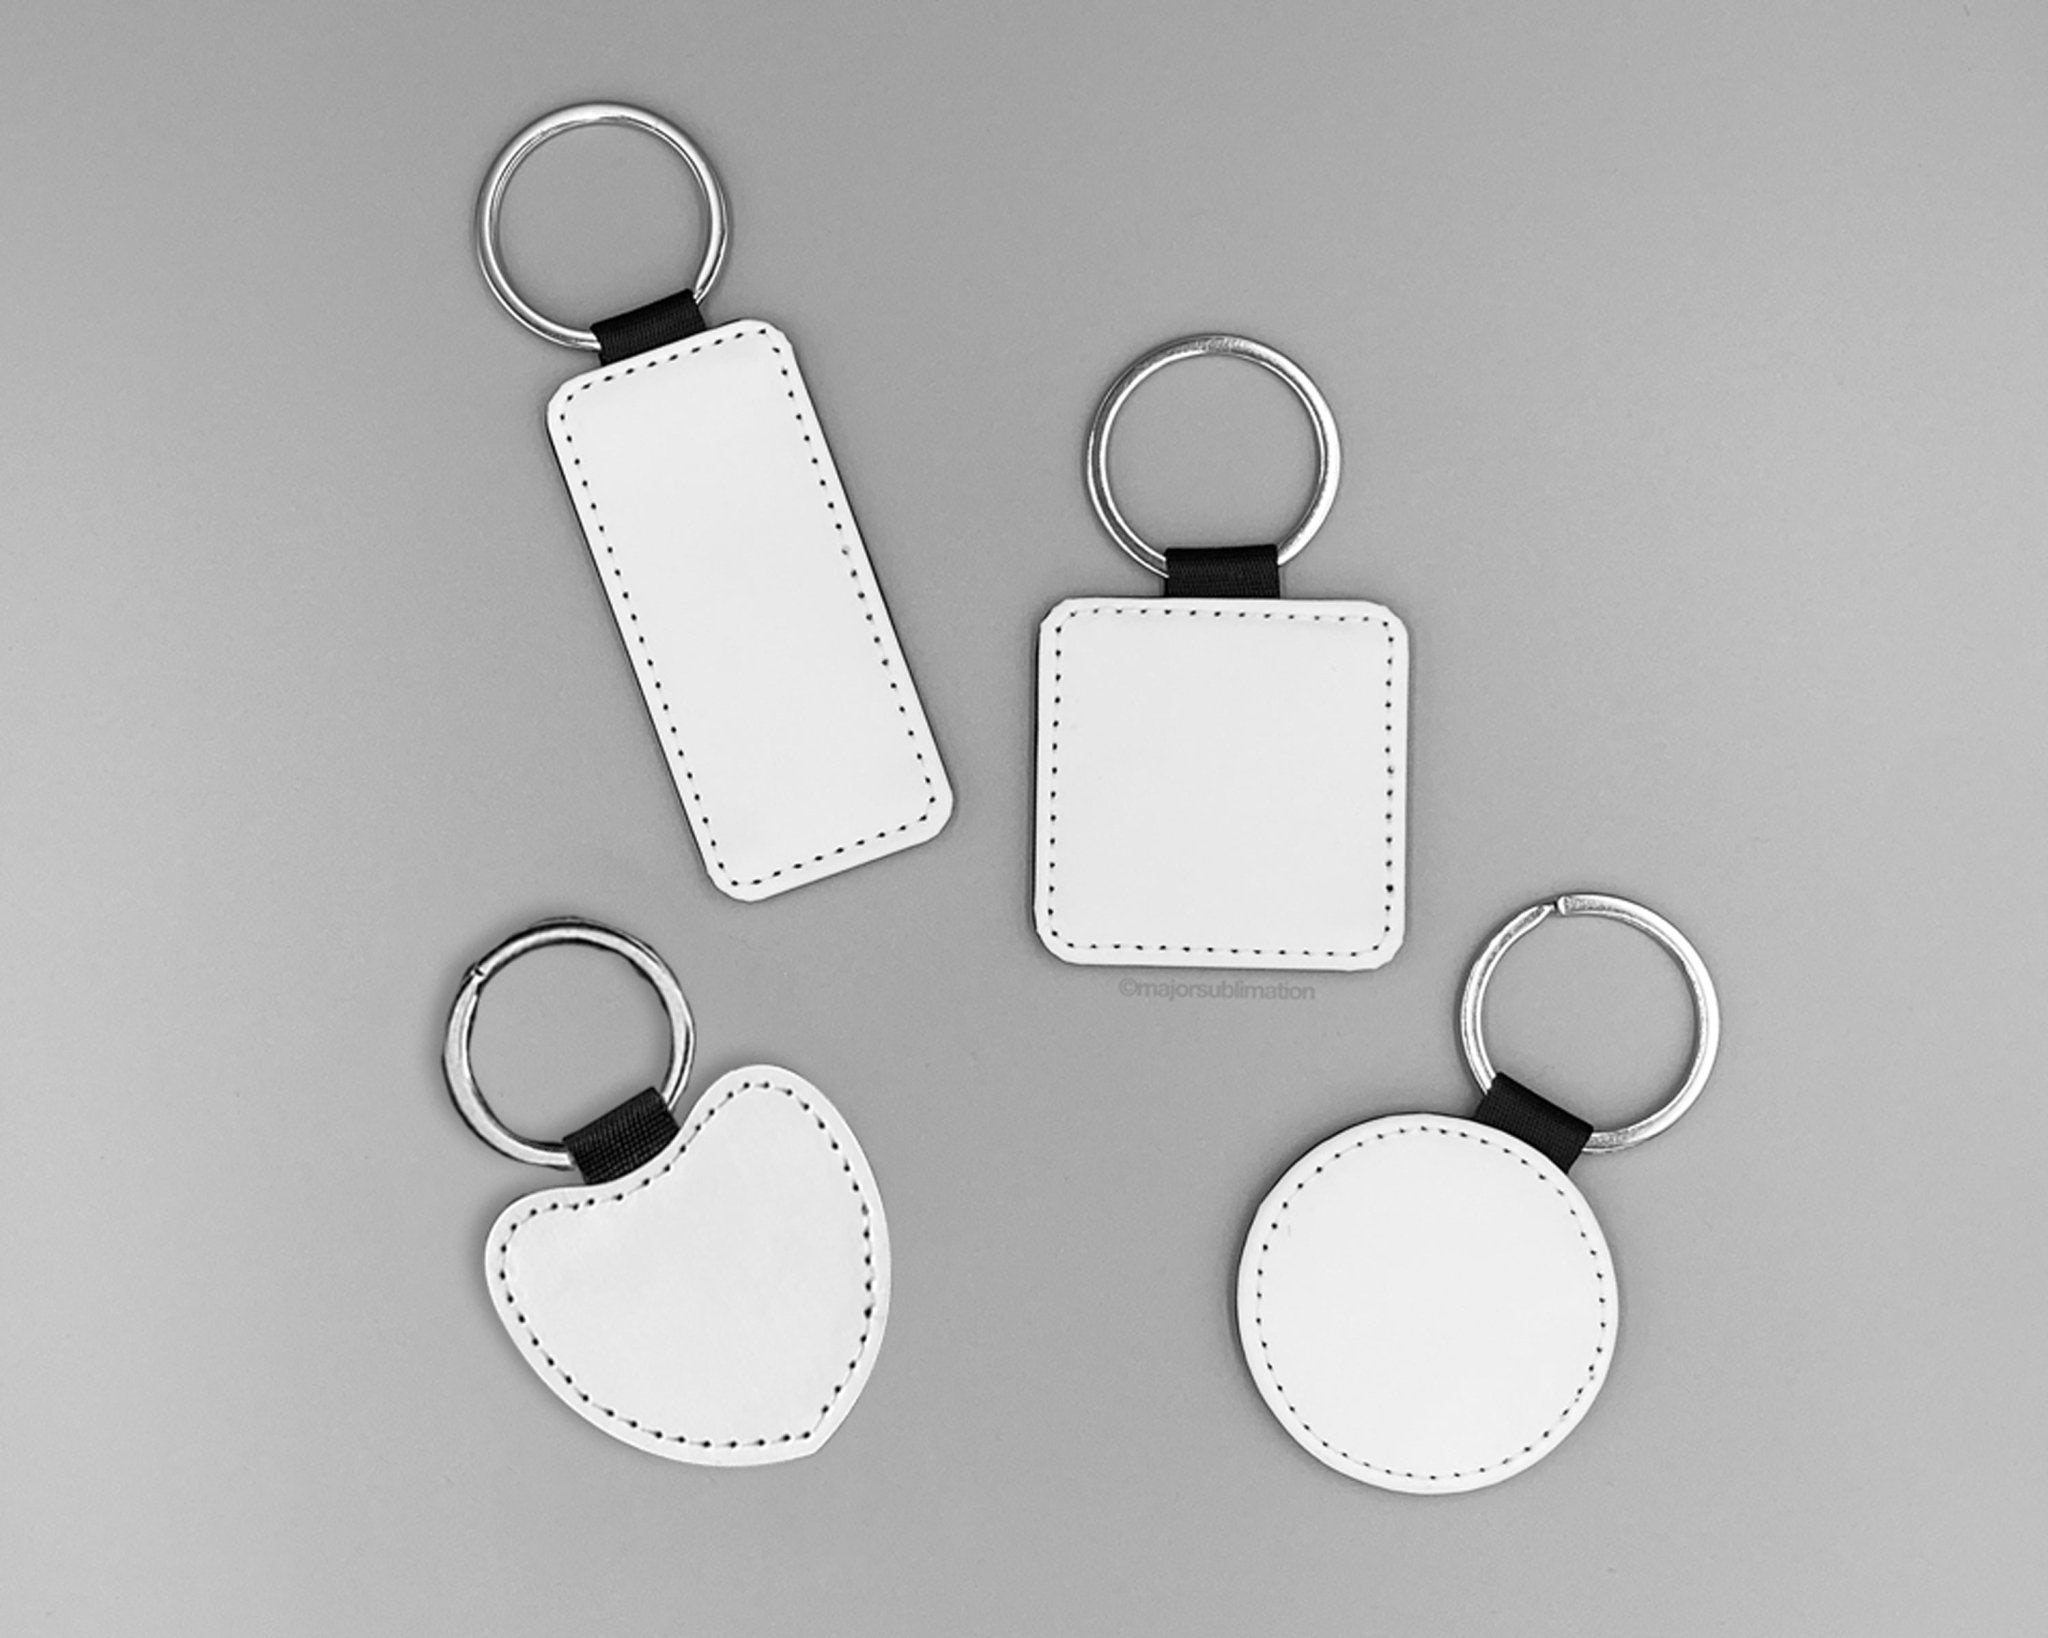 1.9 Sublimation Keychains by Make Market®, 4ct.